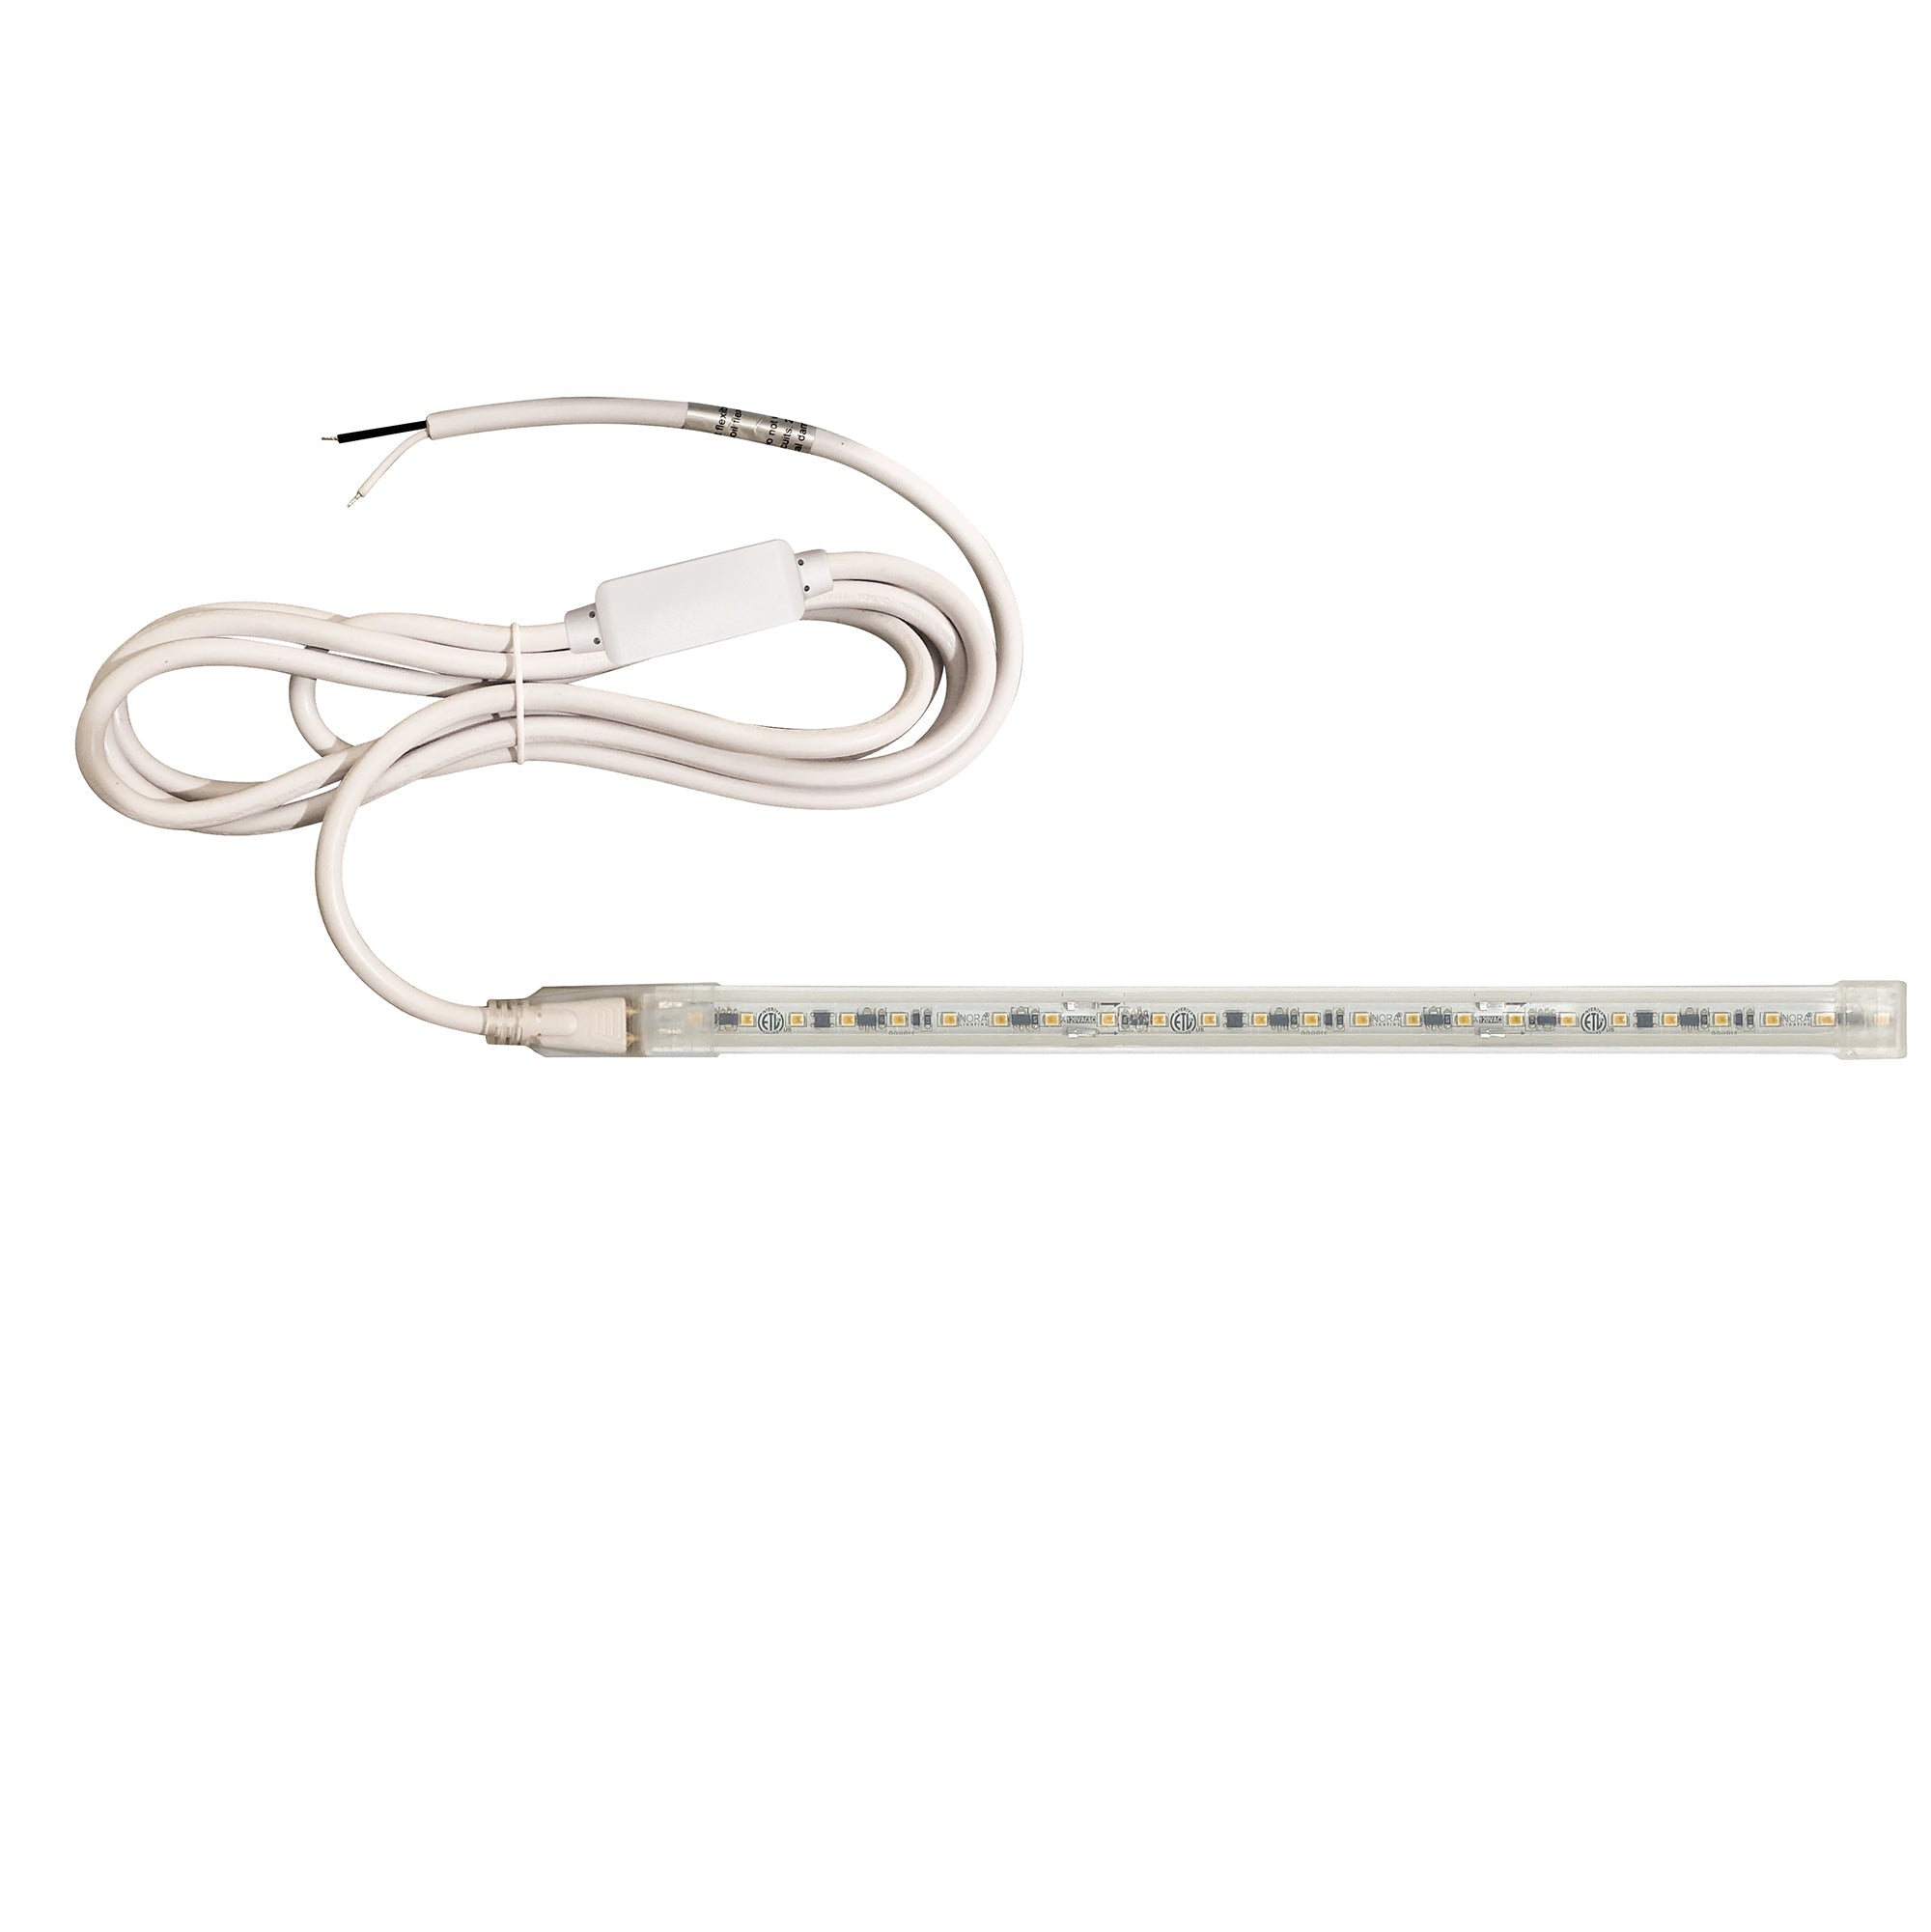 Nora Lighting NUTP13-W52-8-12-927/HW - Accent / Undercabinet - Custom Cut 52-ft, 8-in 120V Continuous LED Tape Light, 330lm / 3.6W per foot, 2700K, w/ Mounting Clips and 8' Hardwired Power Cord w/ Surge Protector